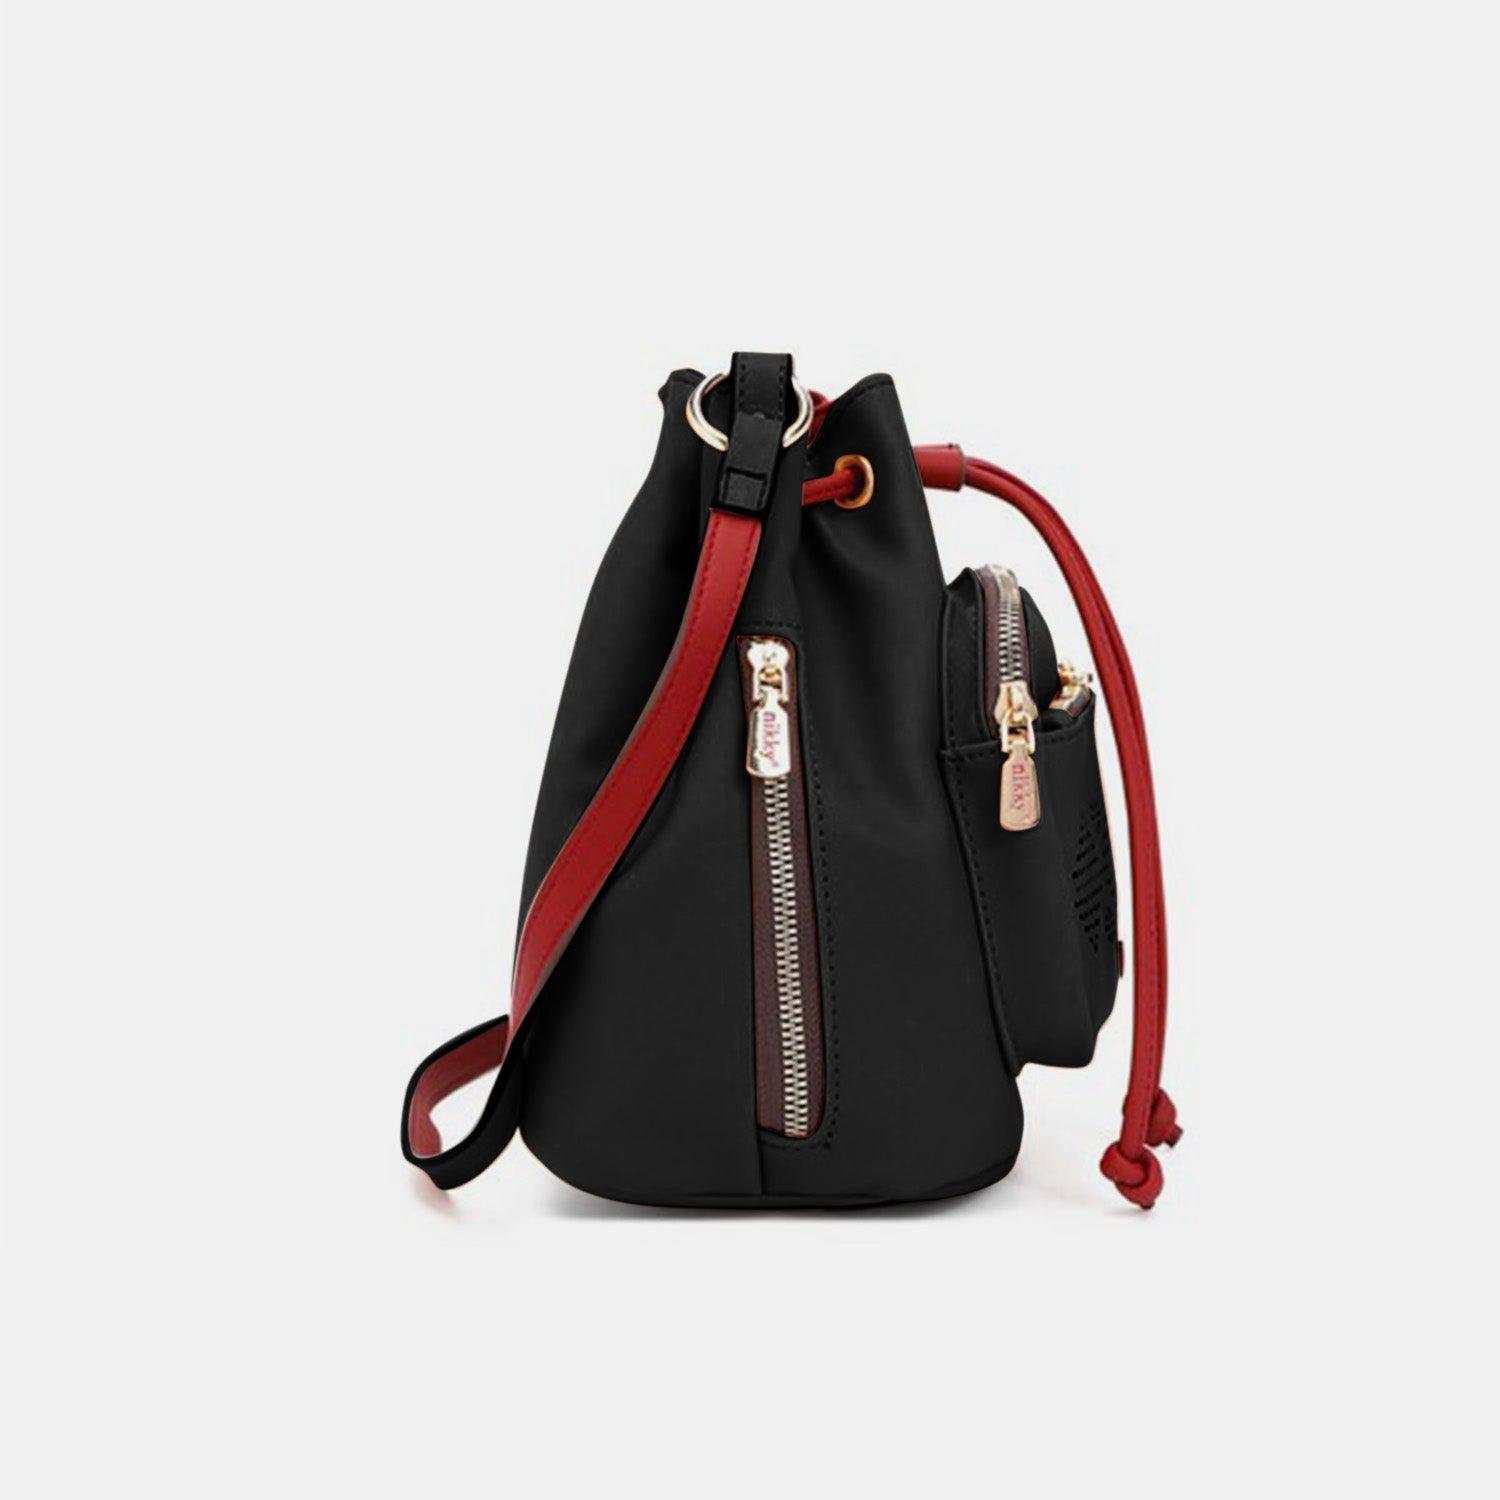 a small black bag with a red strap